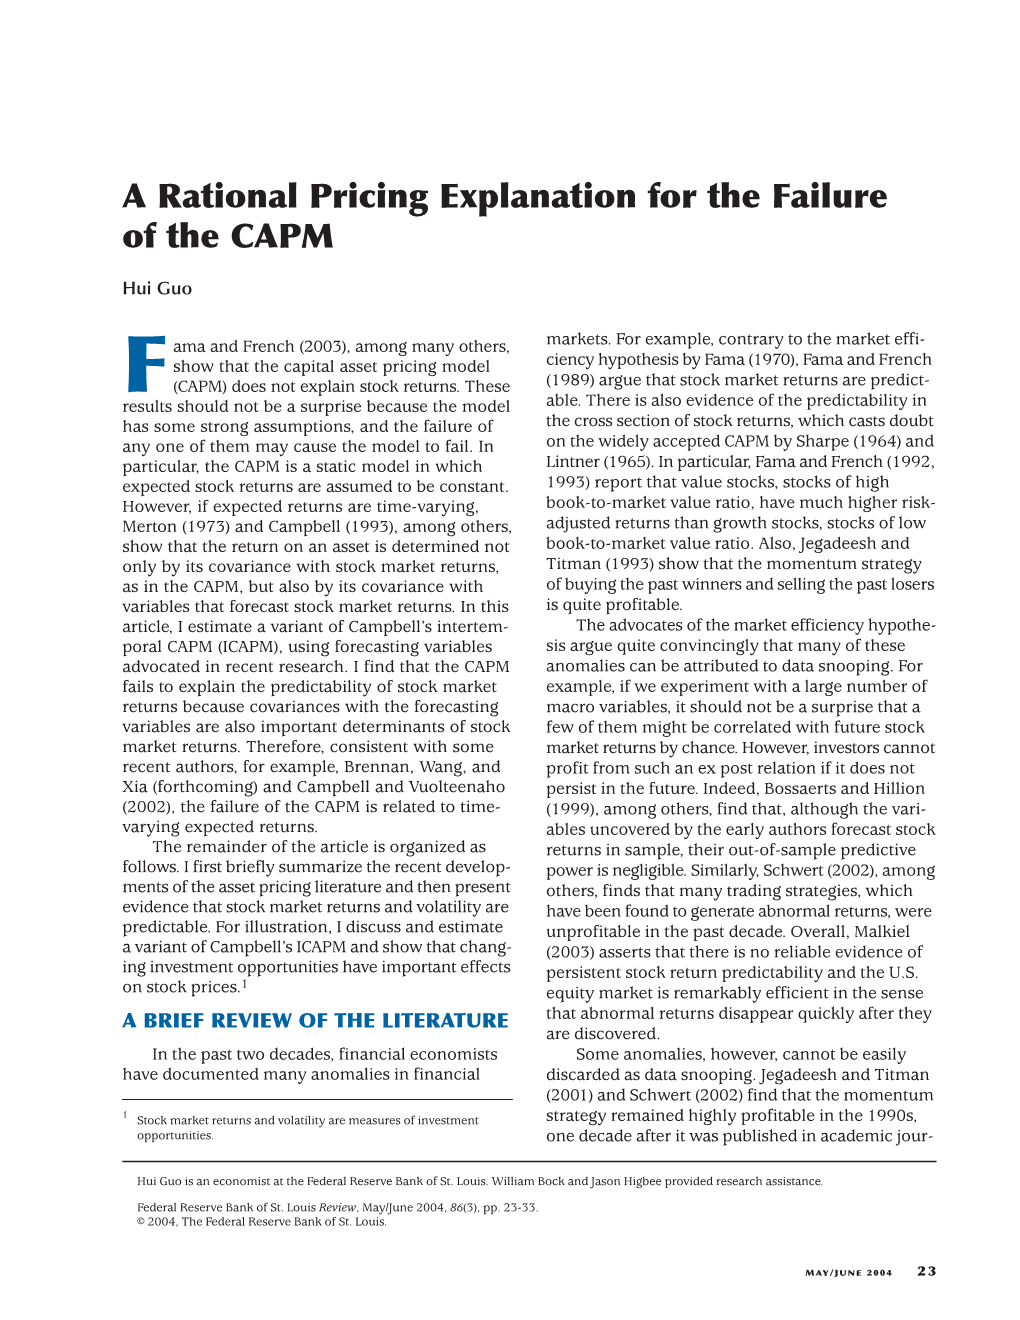 A Rational Pricing Explanation for the Failure of CAPM